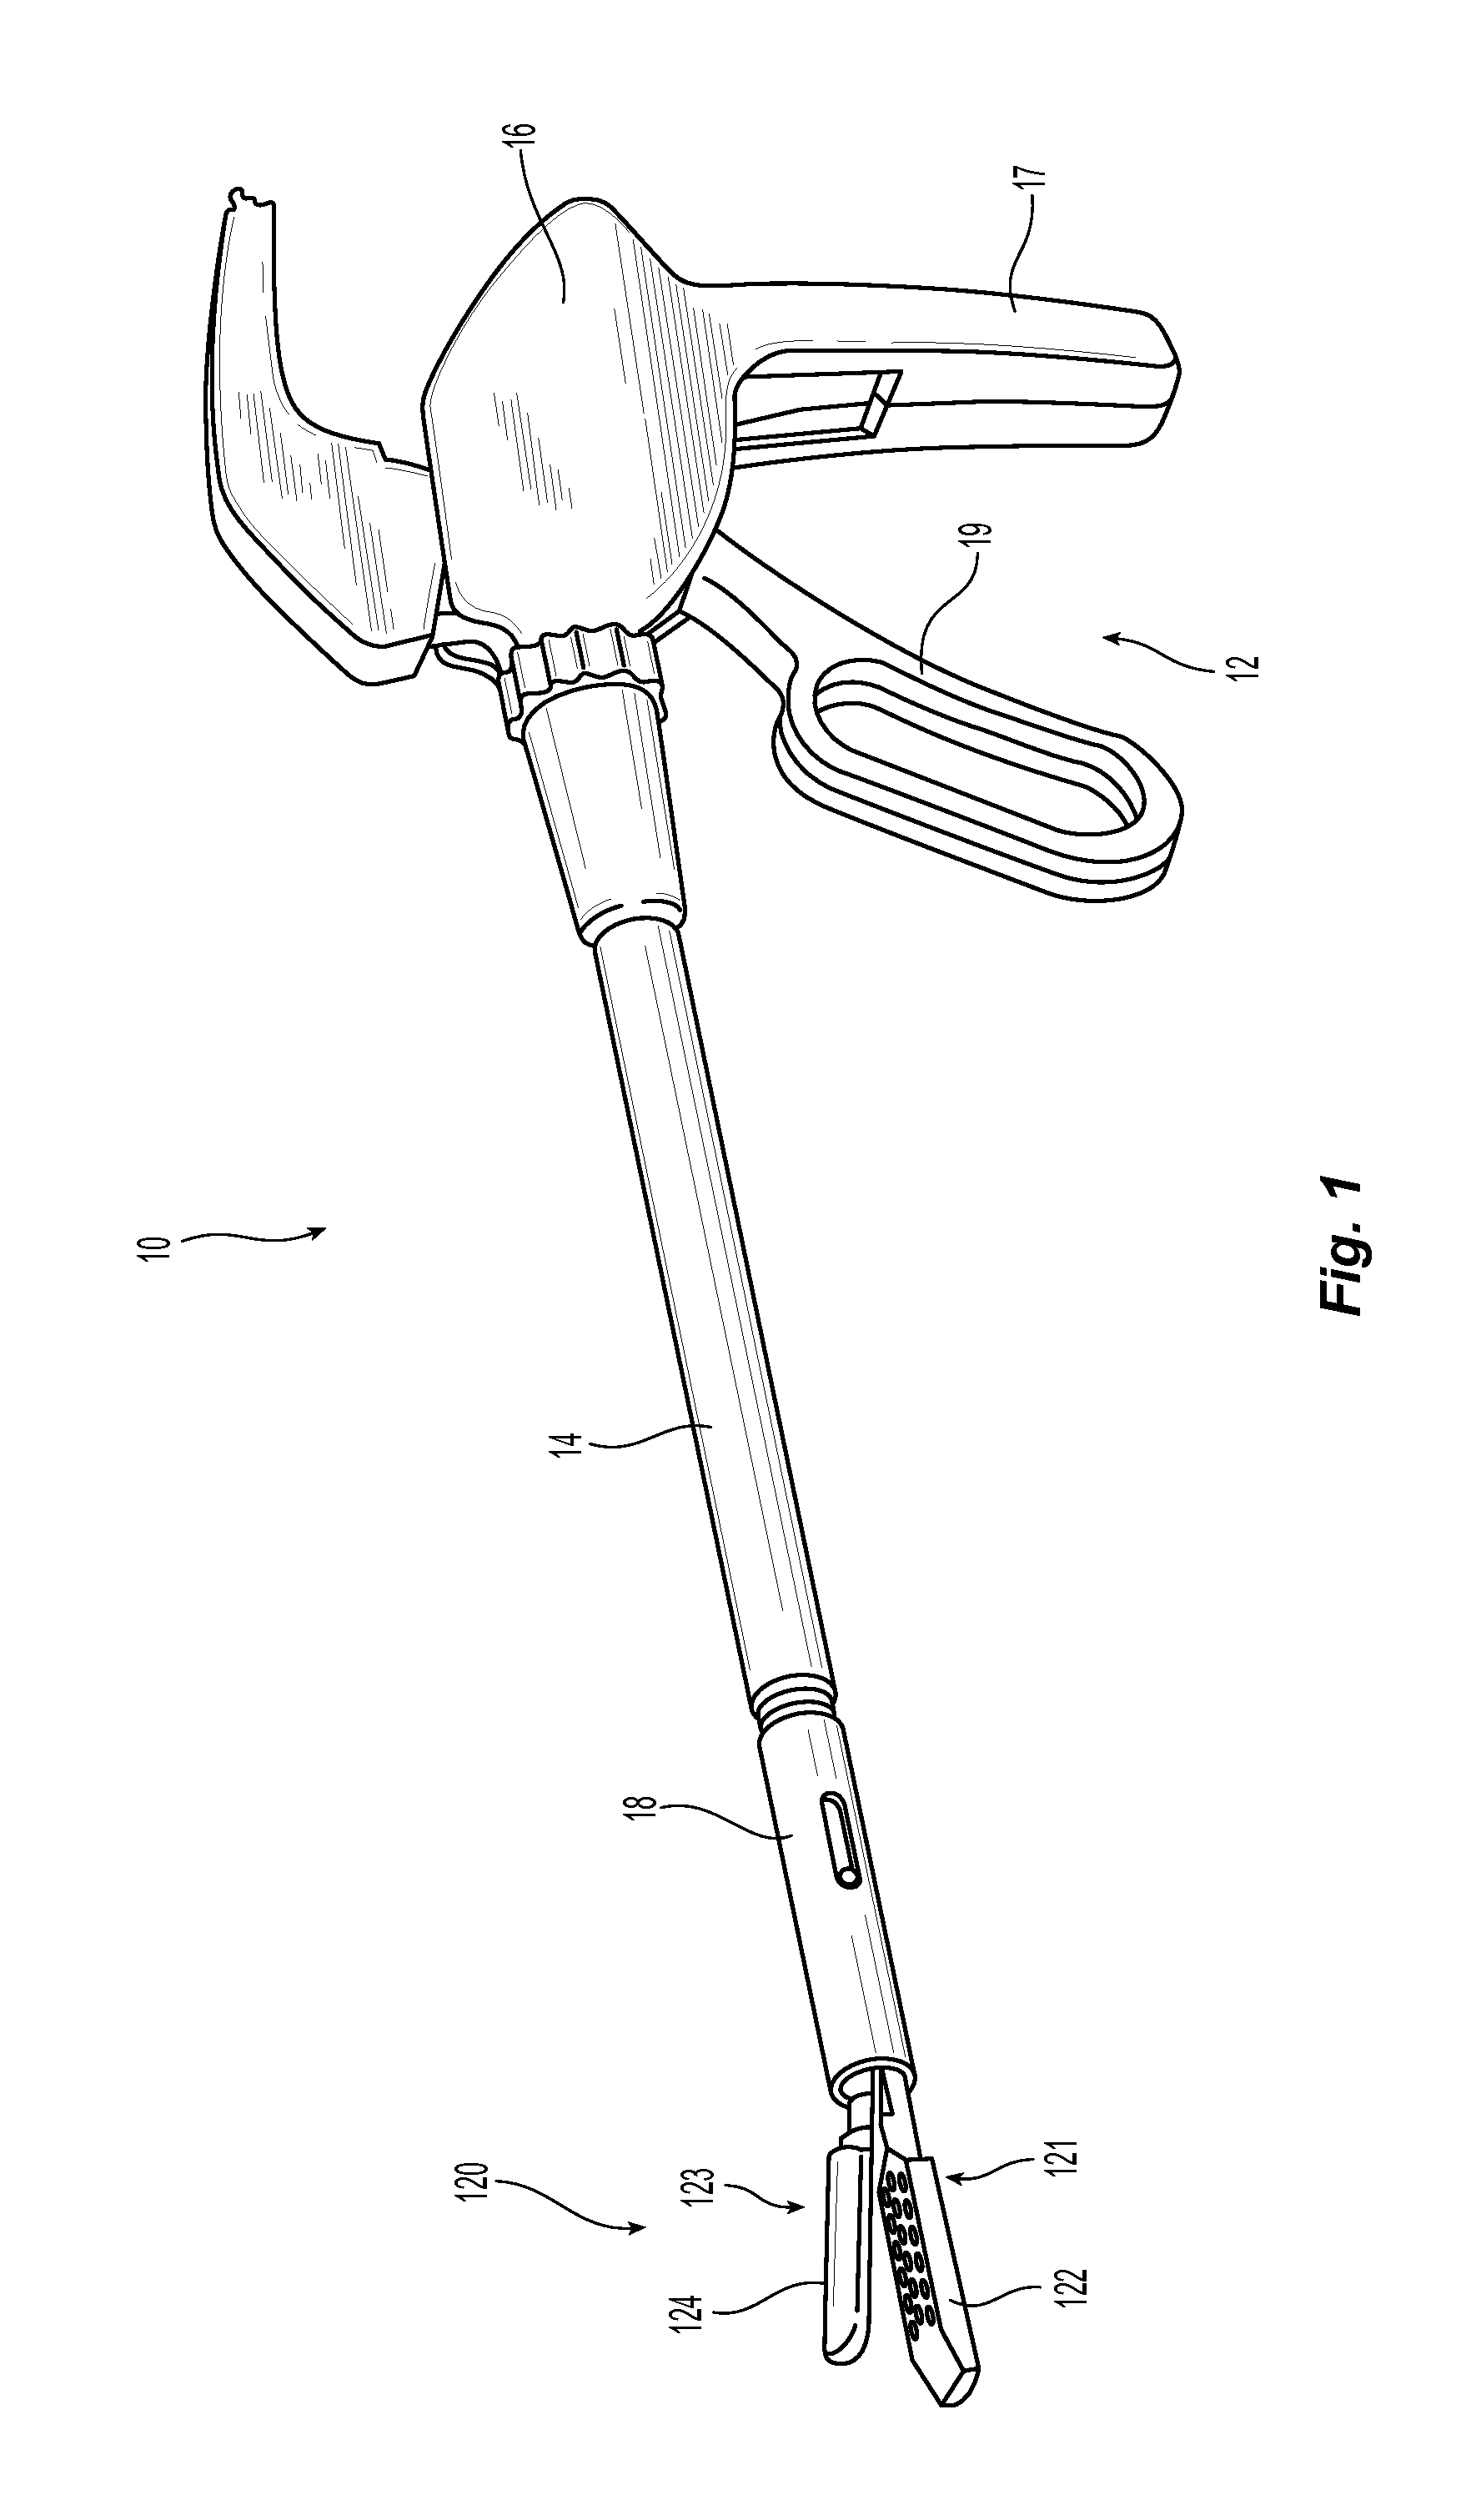 Surgical staples and end effectors for deploying the same